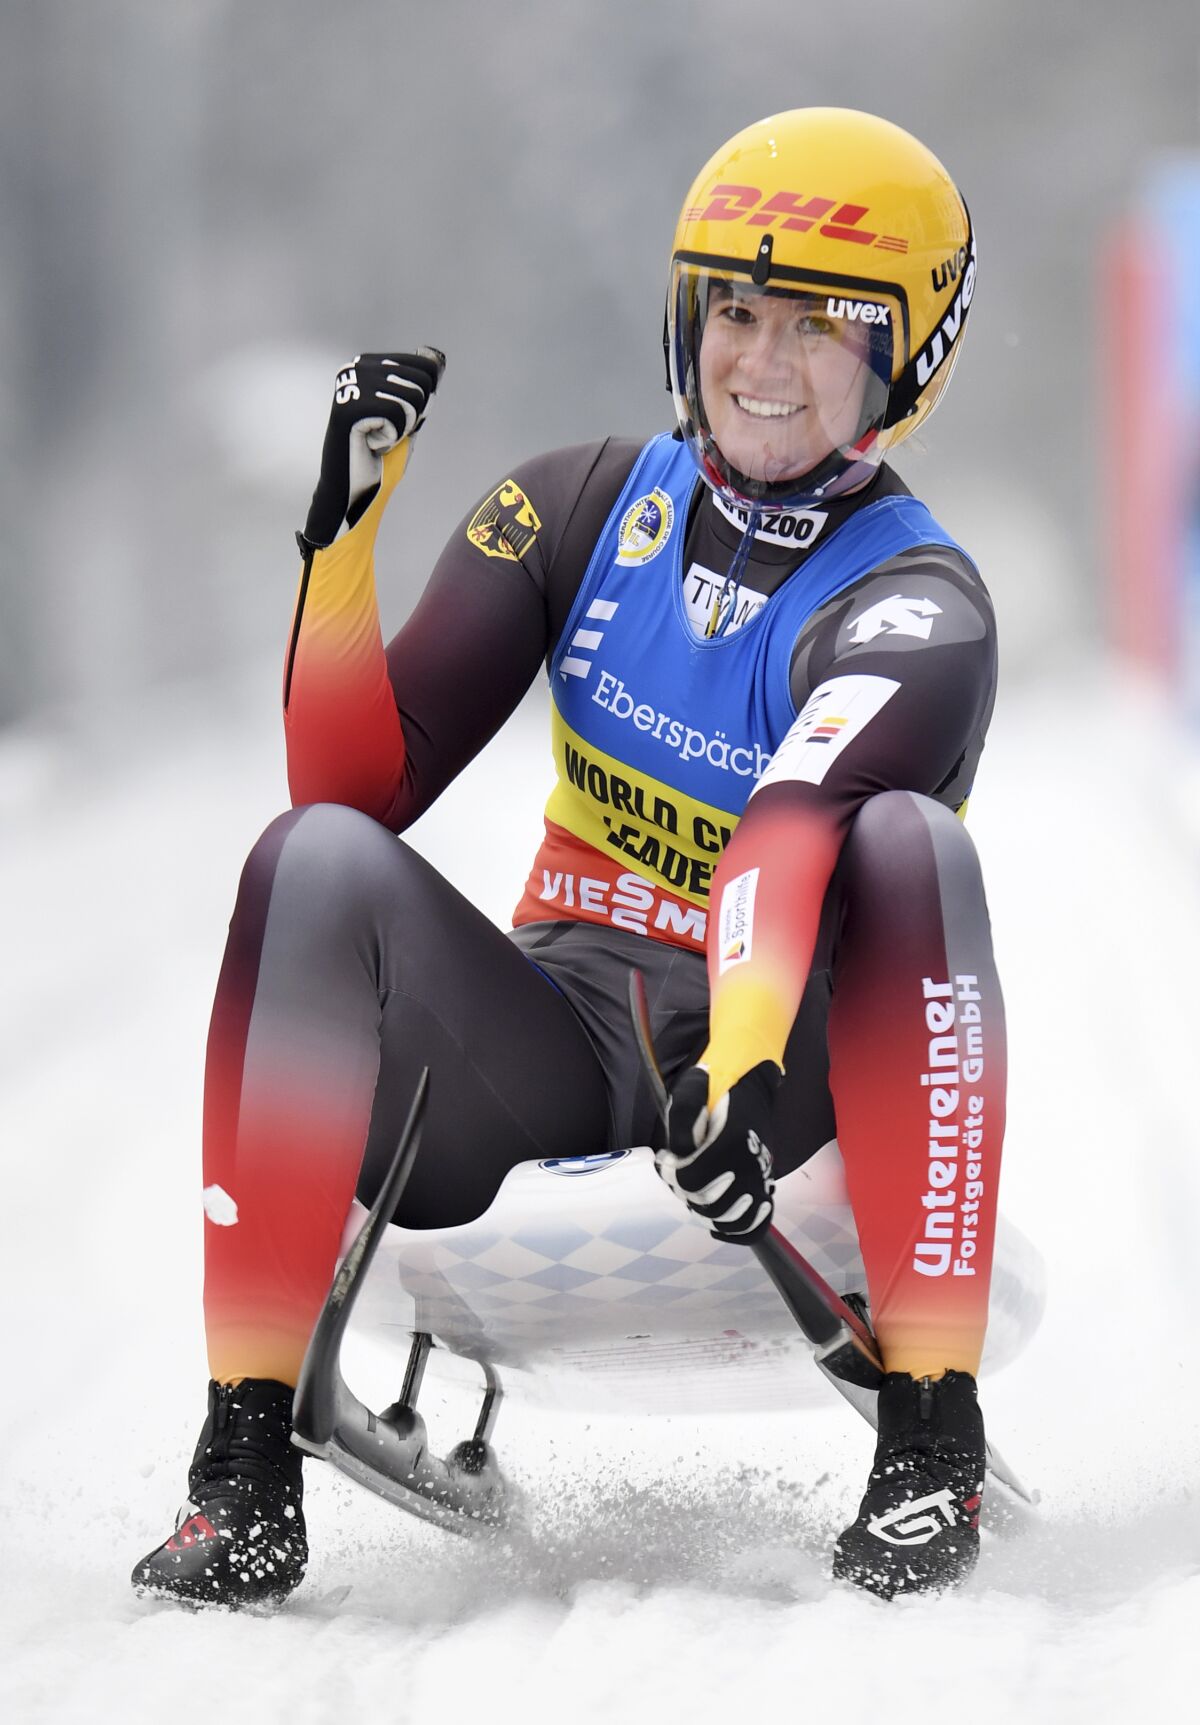 Second placed Natalie Geisenberger from Germany celebrates as she crosses the finish line for the women's single luge world cup race in Schoenau at the Koenigssee, Germany, Sunday, Jan. 3, 2021. (Tobias Hase/dpa via AP)